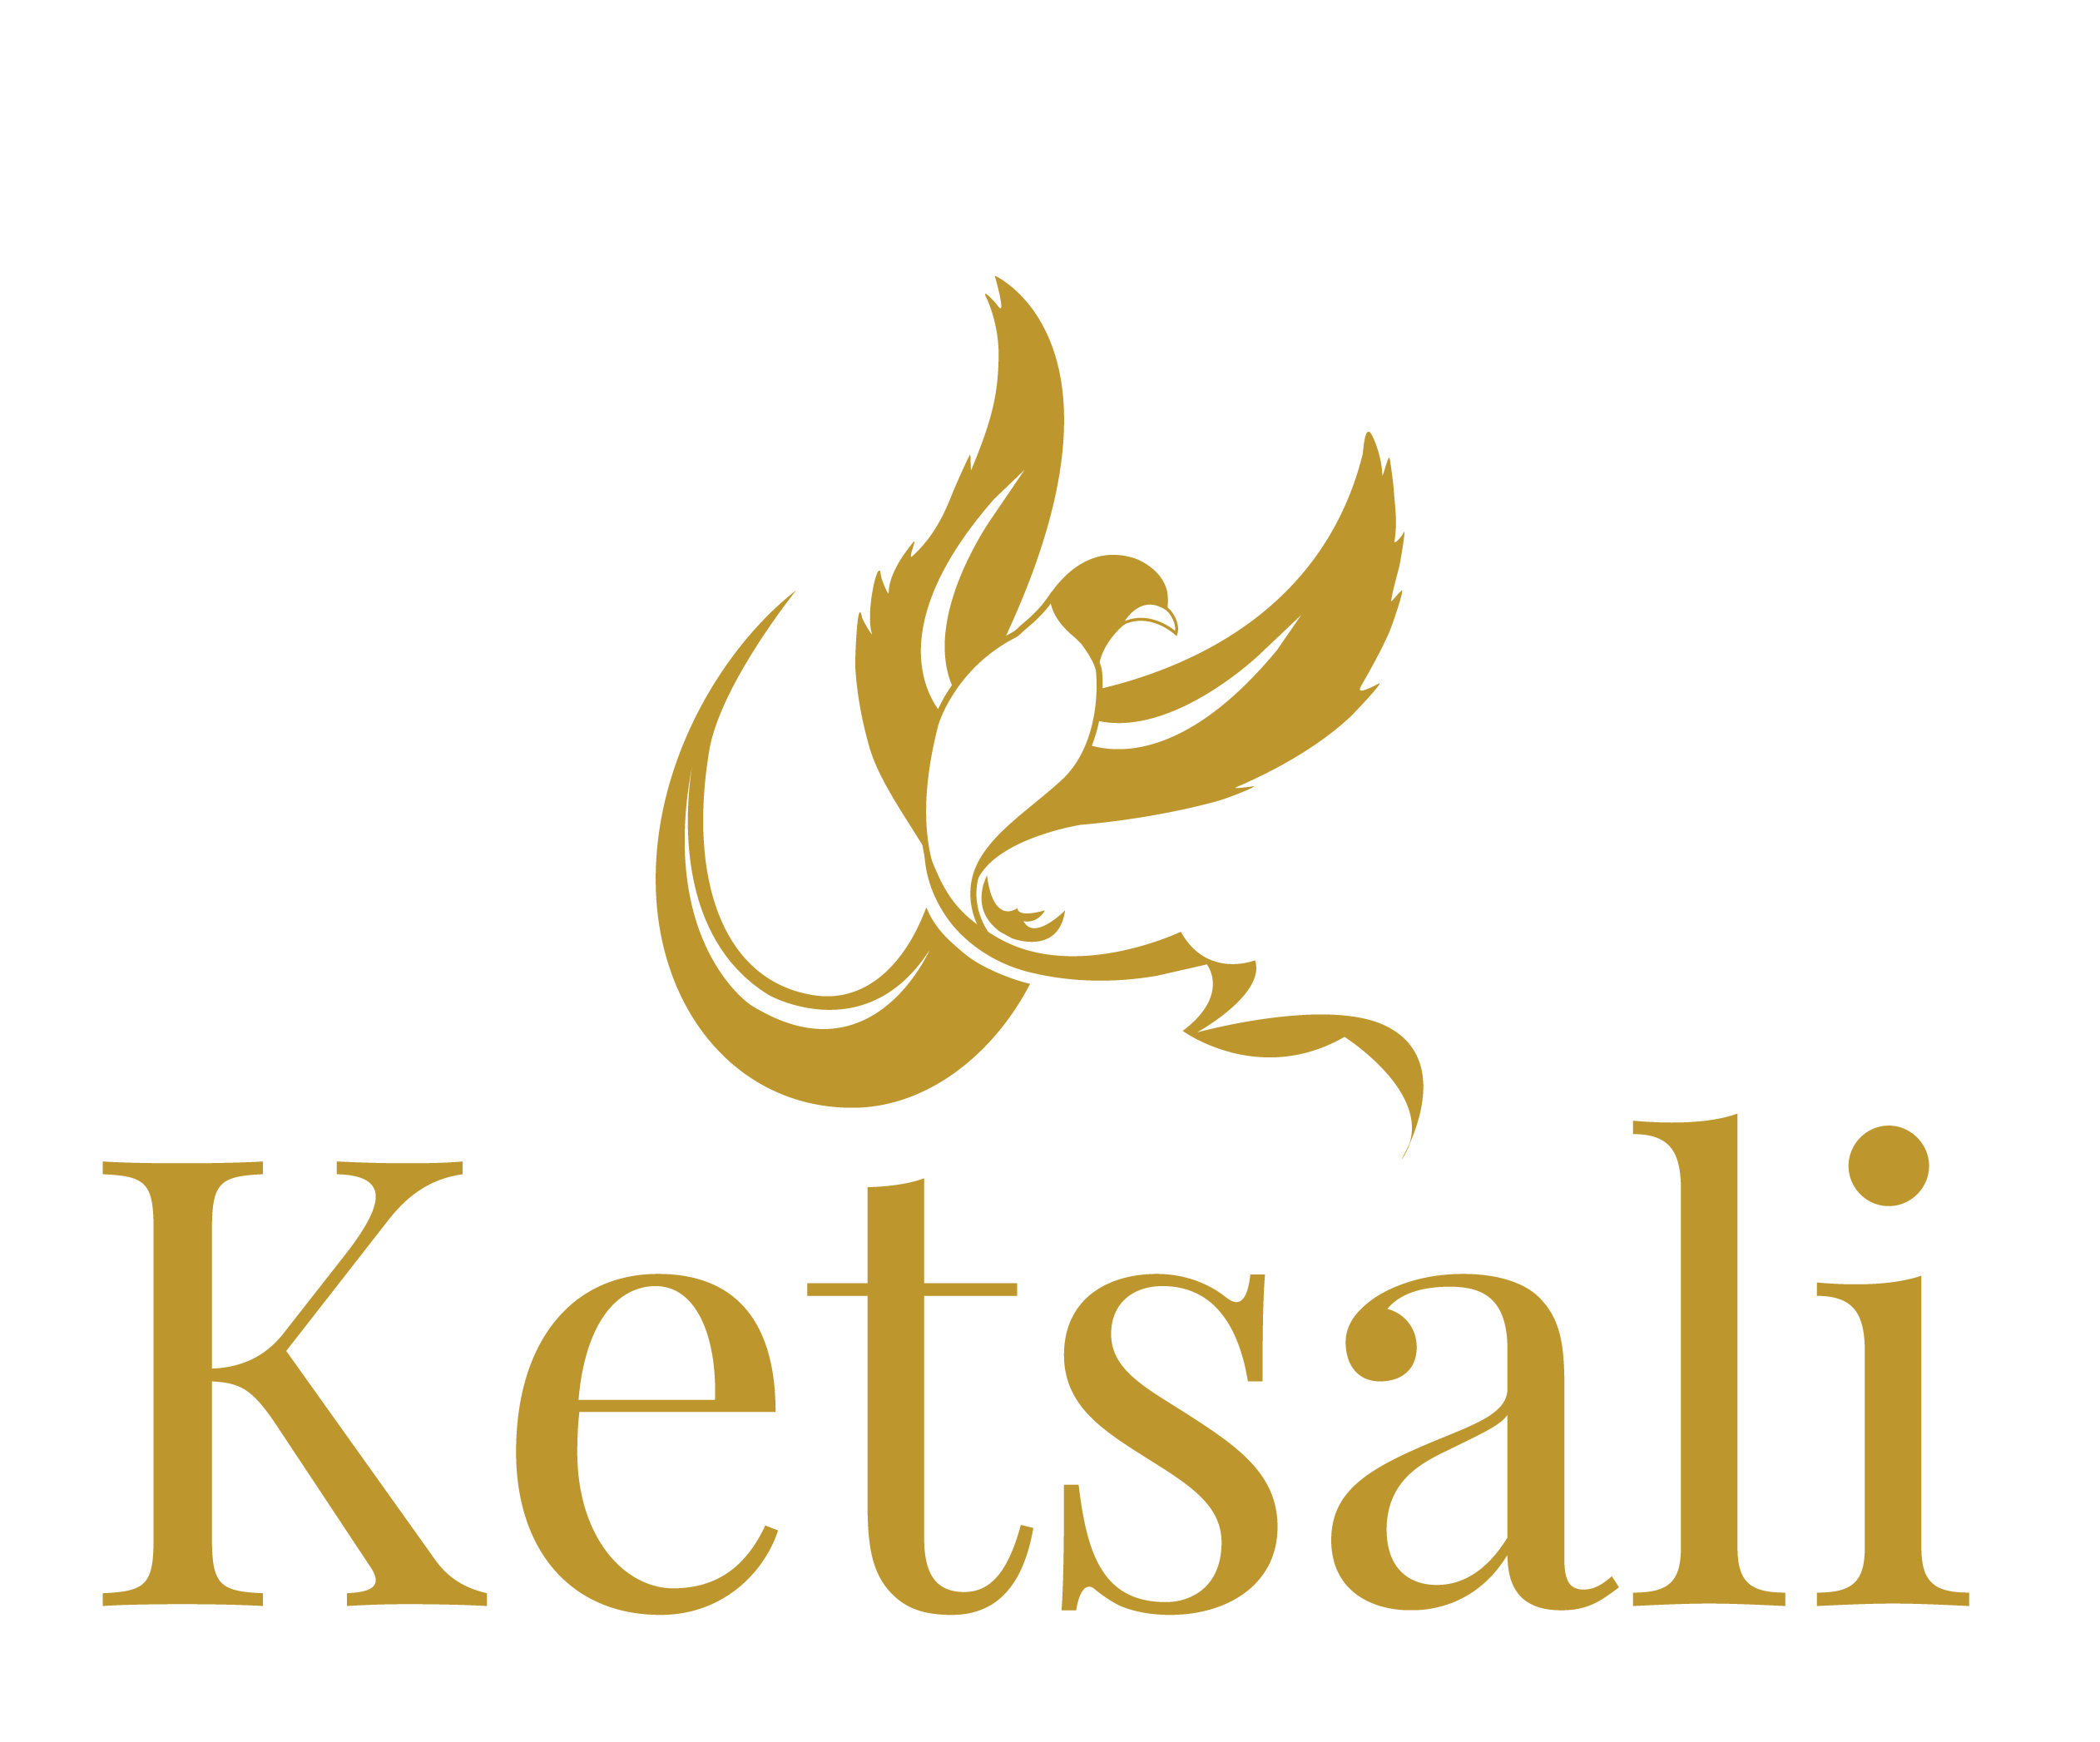 Ketsali Launches a New Category of Ultra-Luxury Second Home Ownership